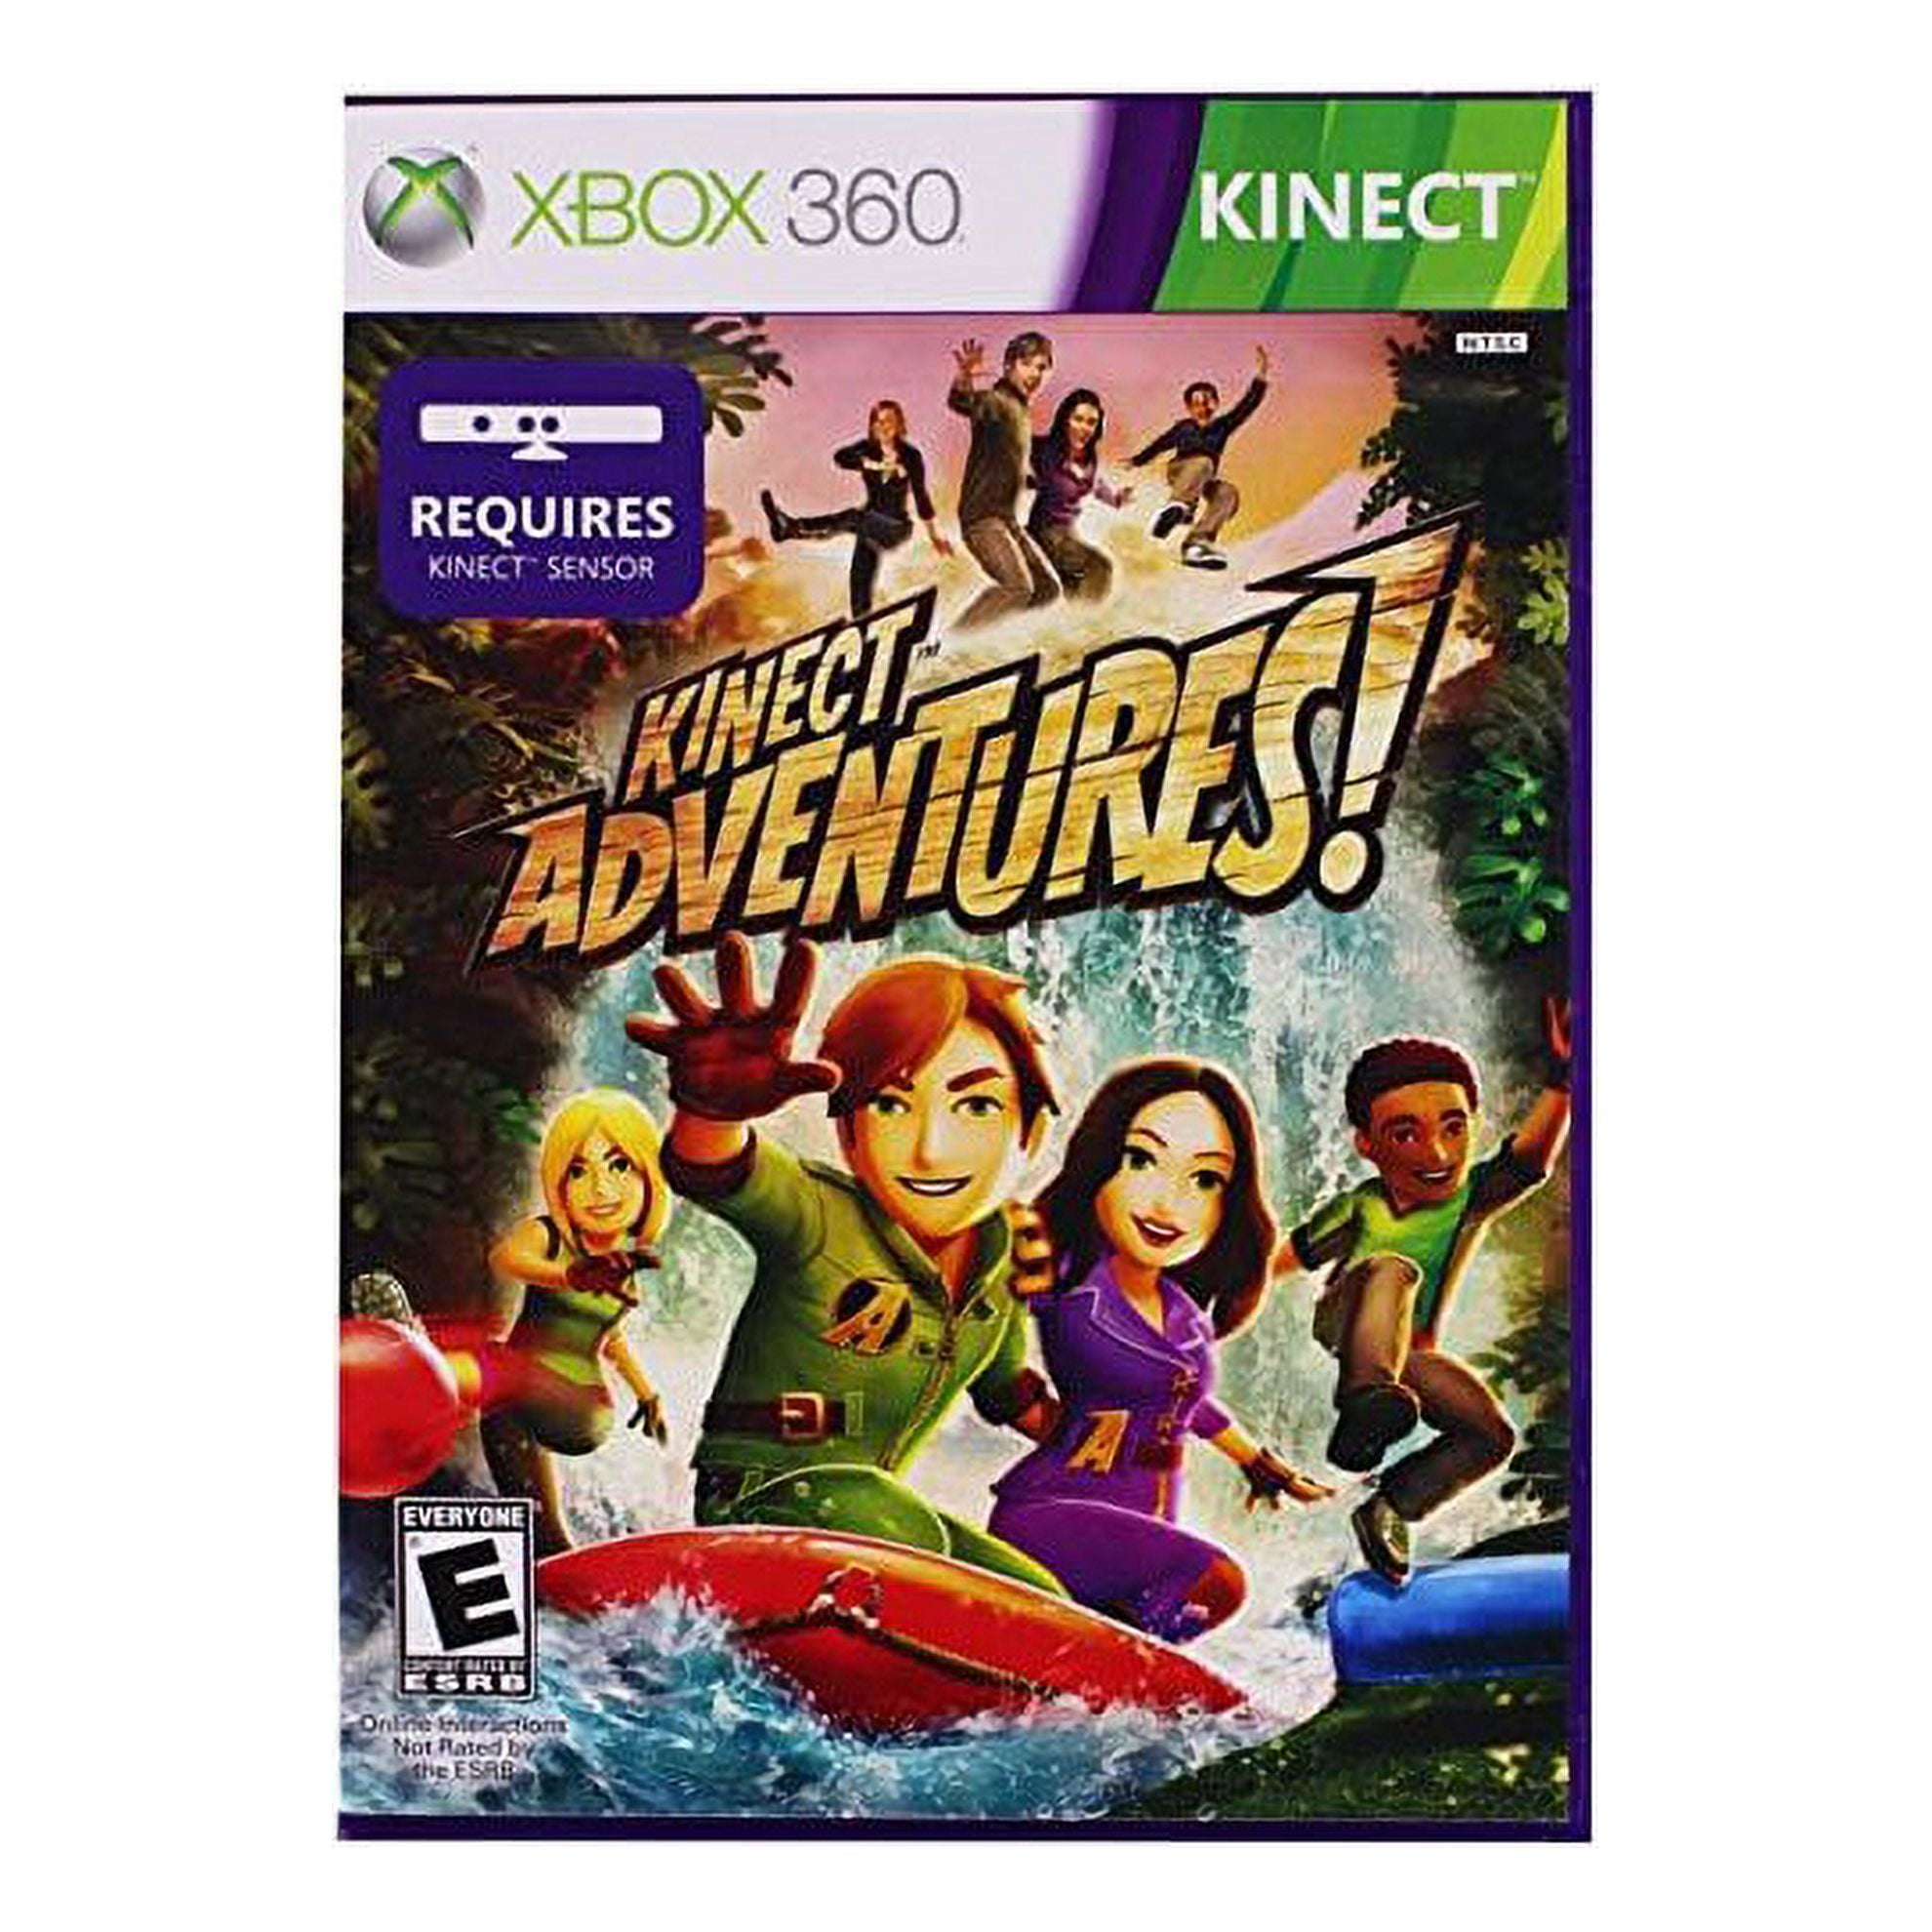 Kinect Adventures! Xbox 360 Microsoft Game Whole Family Fun! Excellent Con